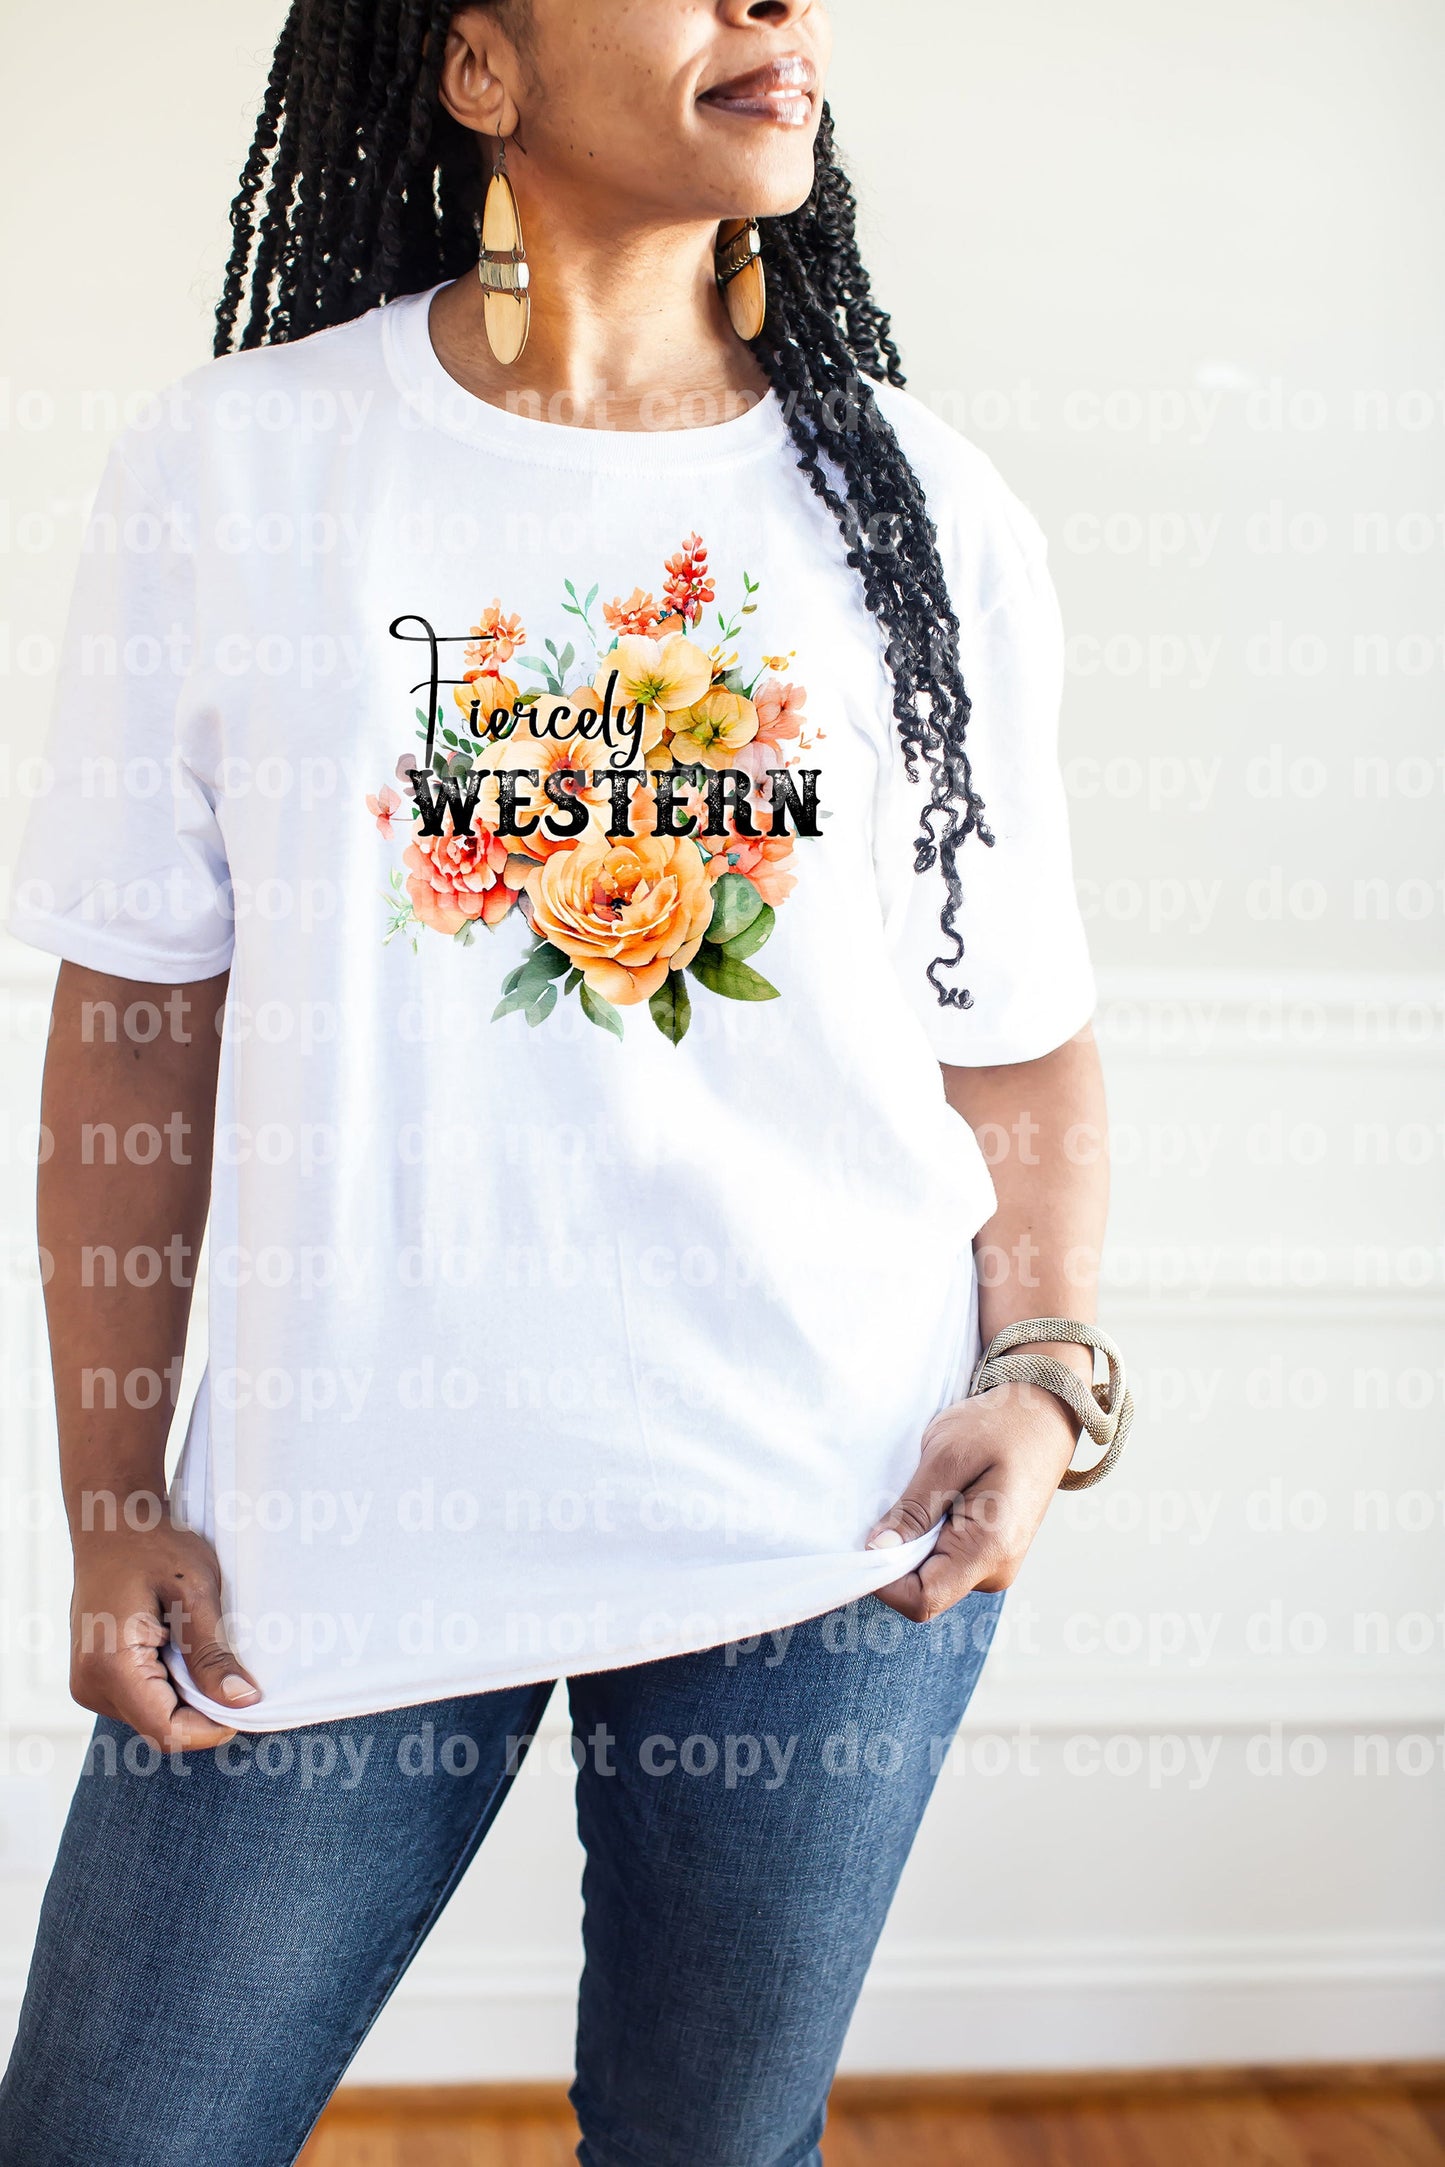 Fiercely Western Dream Print or Sublimation Print